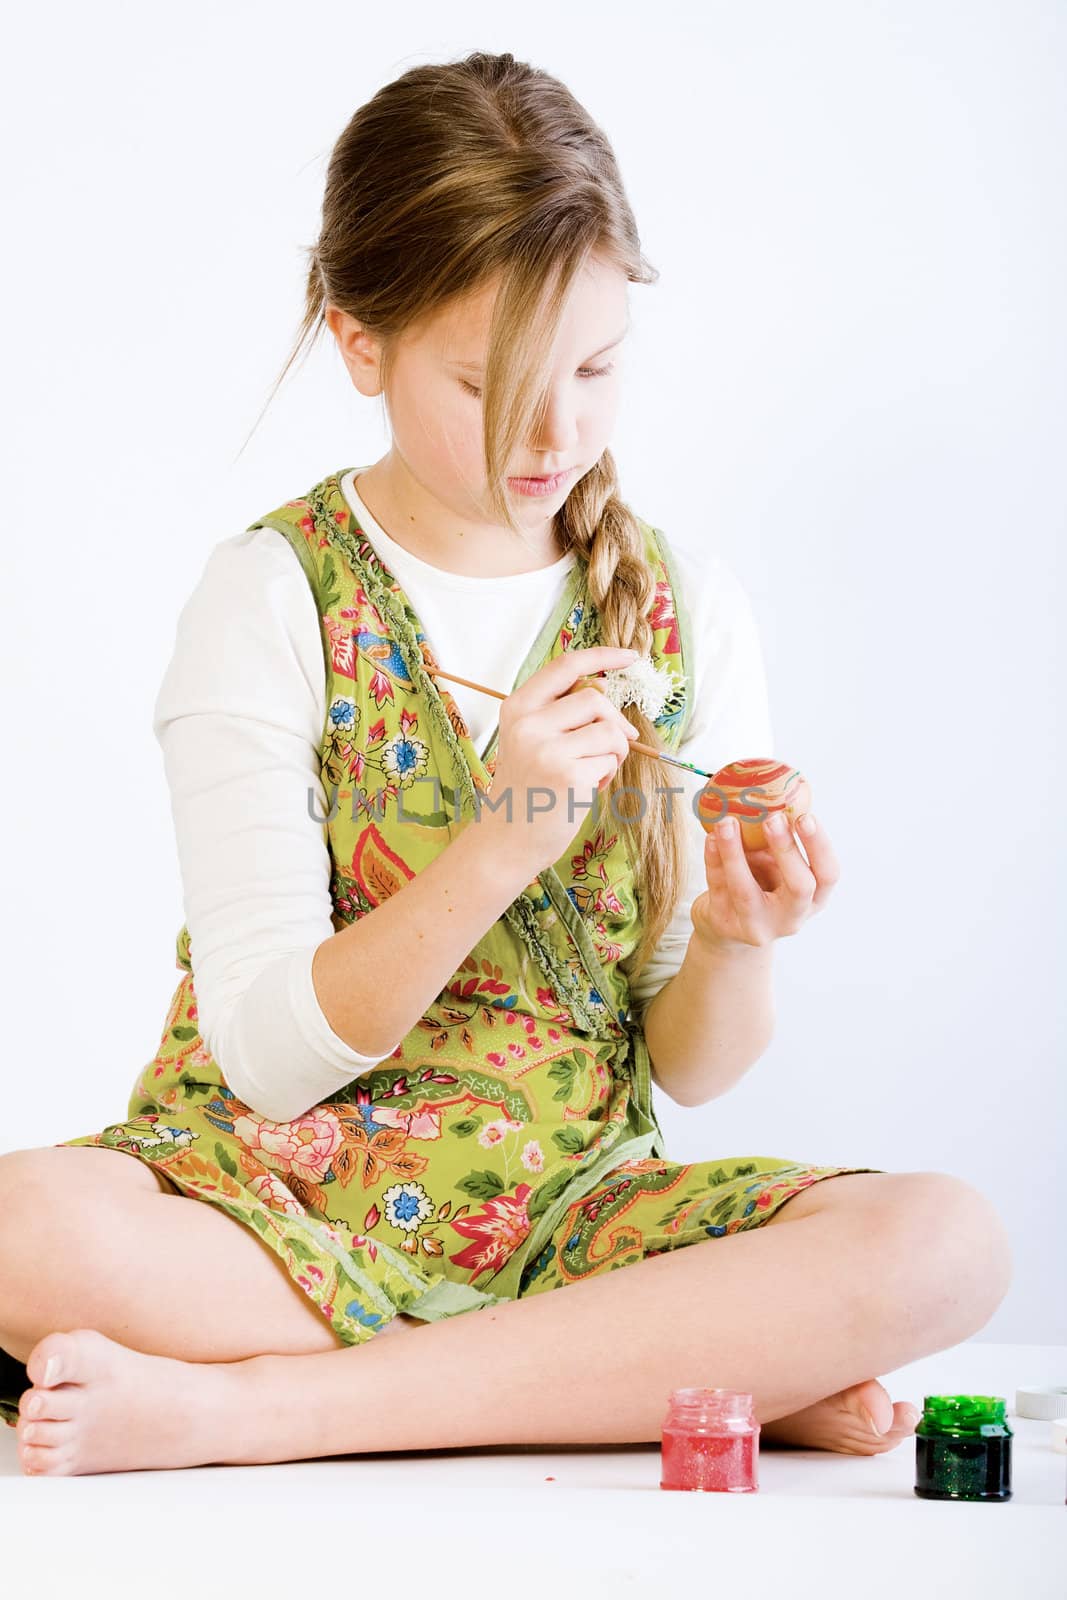 Studio portrait of a young blond girl who is concentrated on painting eggs for easter